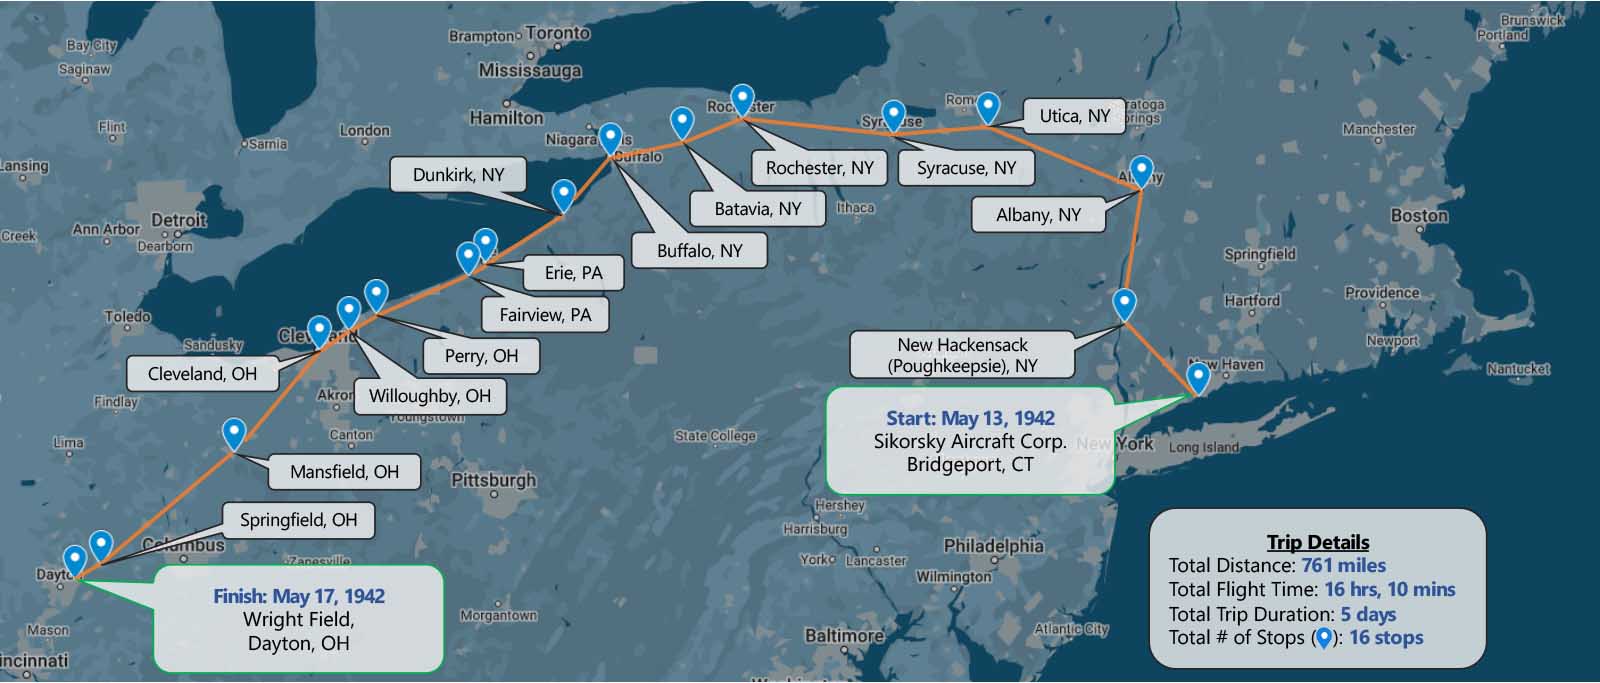 Flight route of the first helicopter delivery, starting at the Sikorsky Aircraft Corporation location in Bridgeport, Connecticut and ending at Wright Field in Dayton, Ohio.